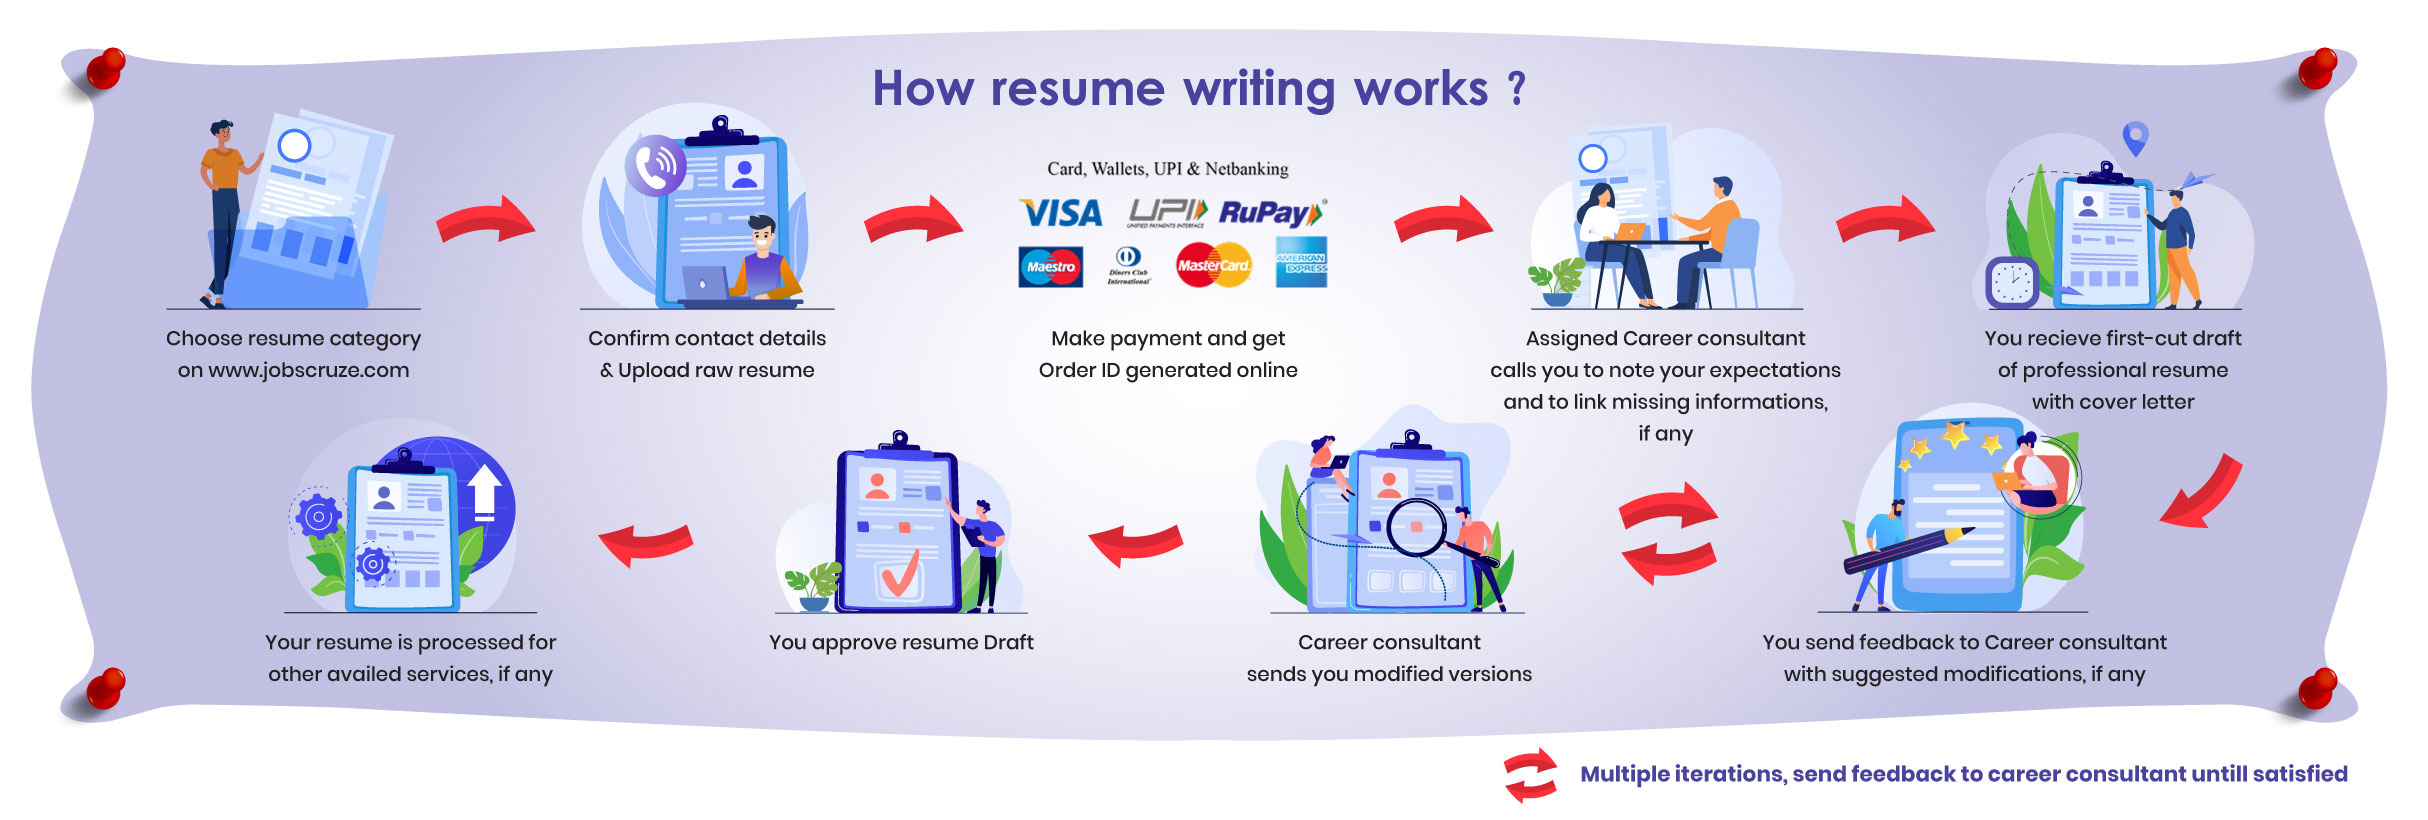 How to working resume